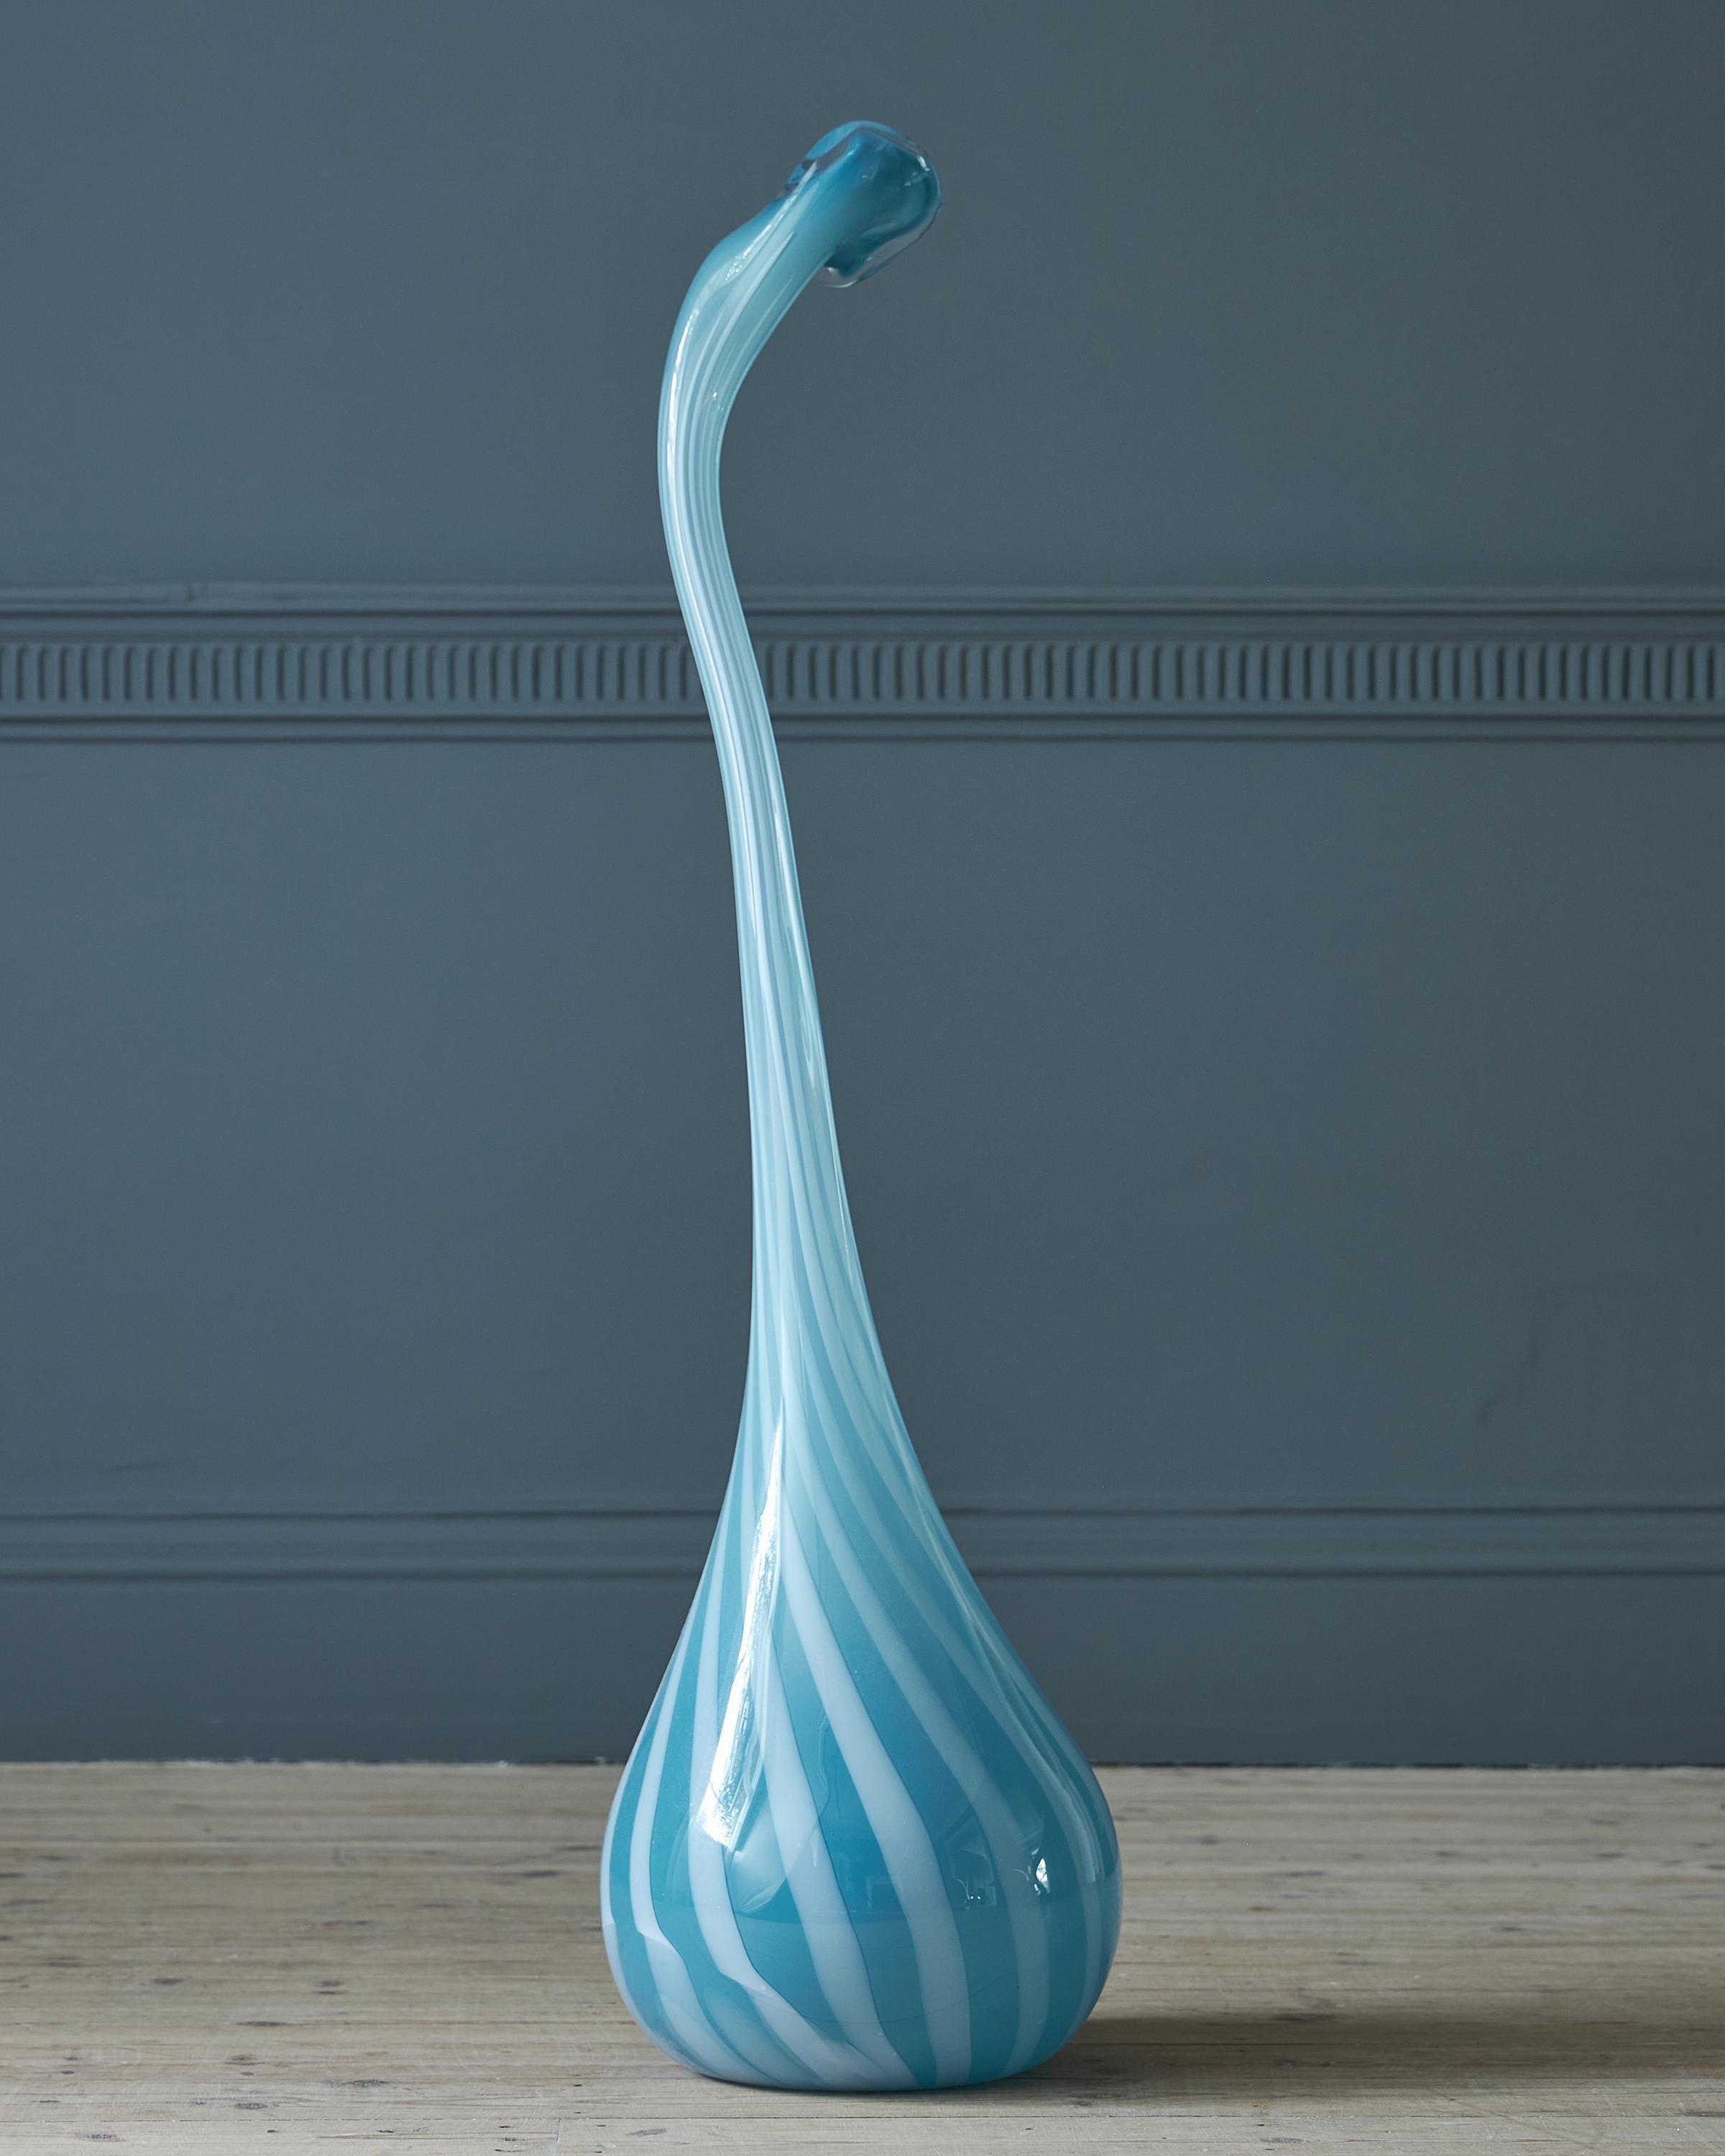 Anthony Stern (British, birth 1944) 

A large twisting glass vase in the form of rose water sprinkler, signed.